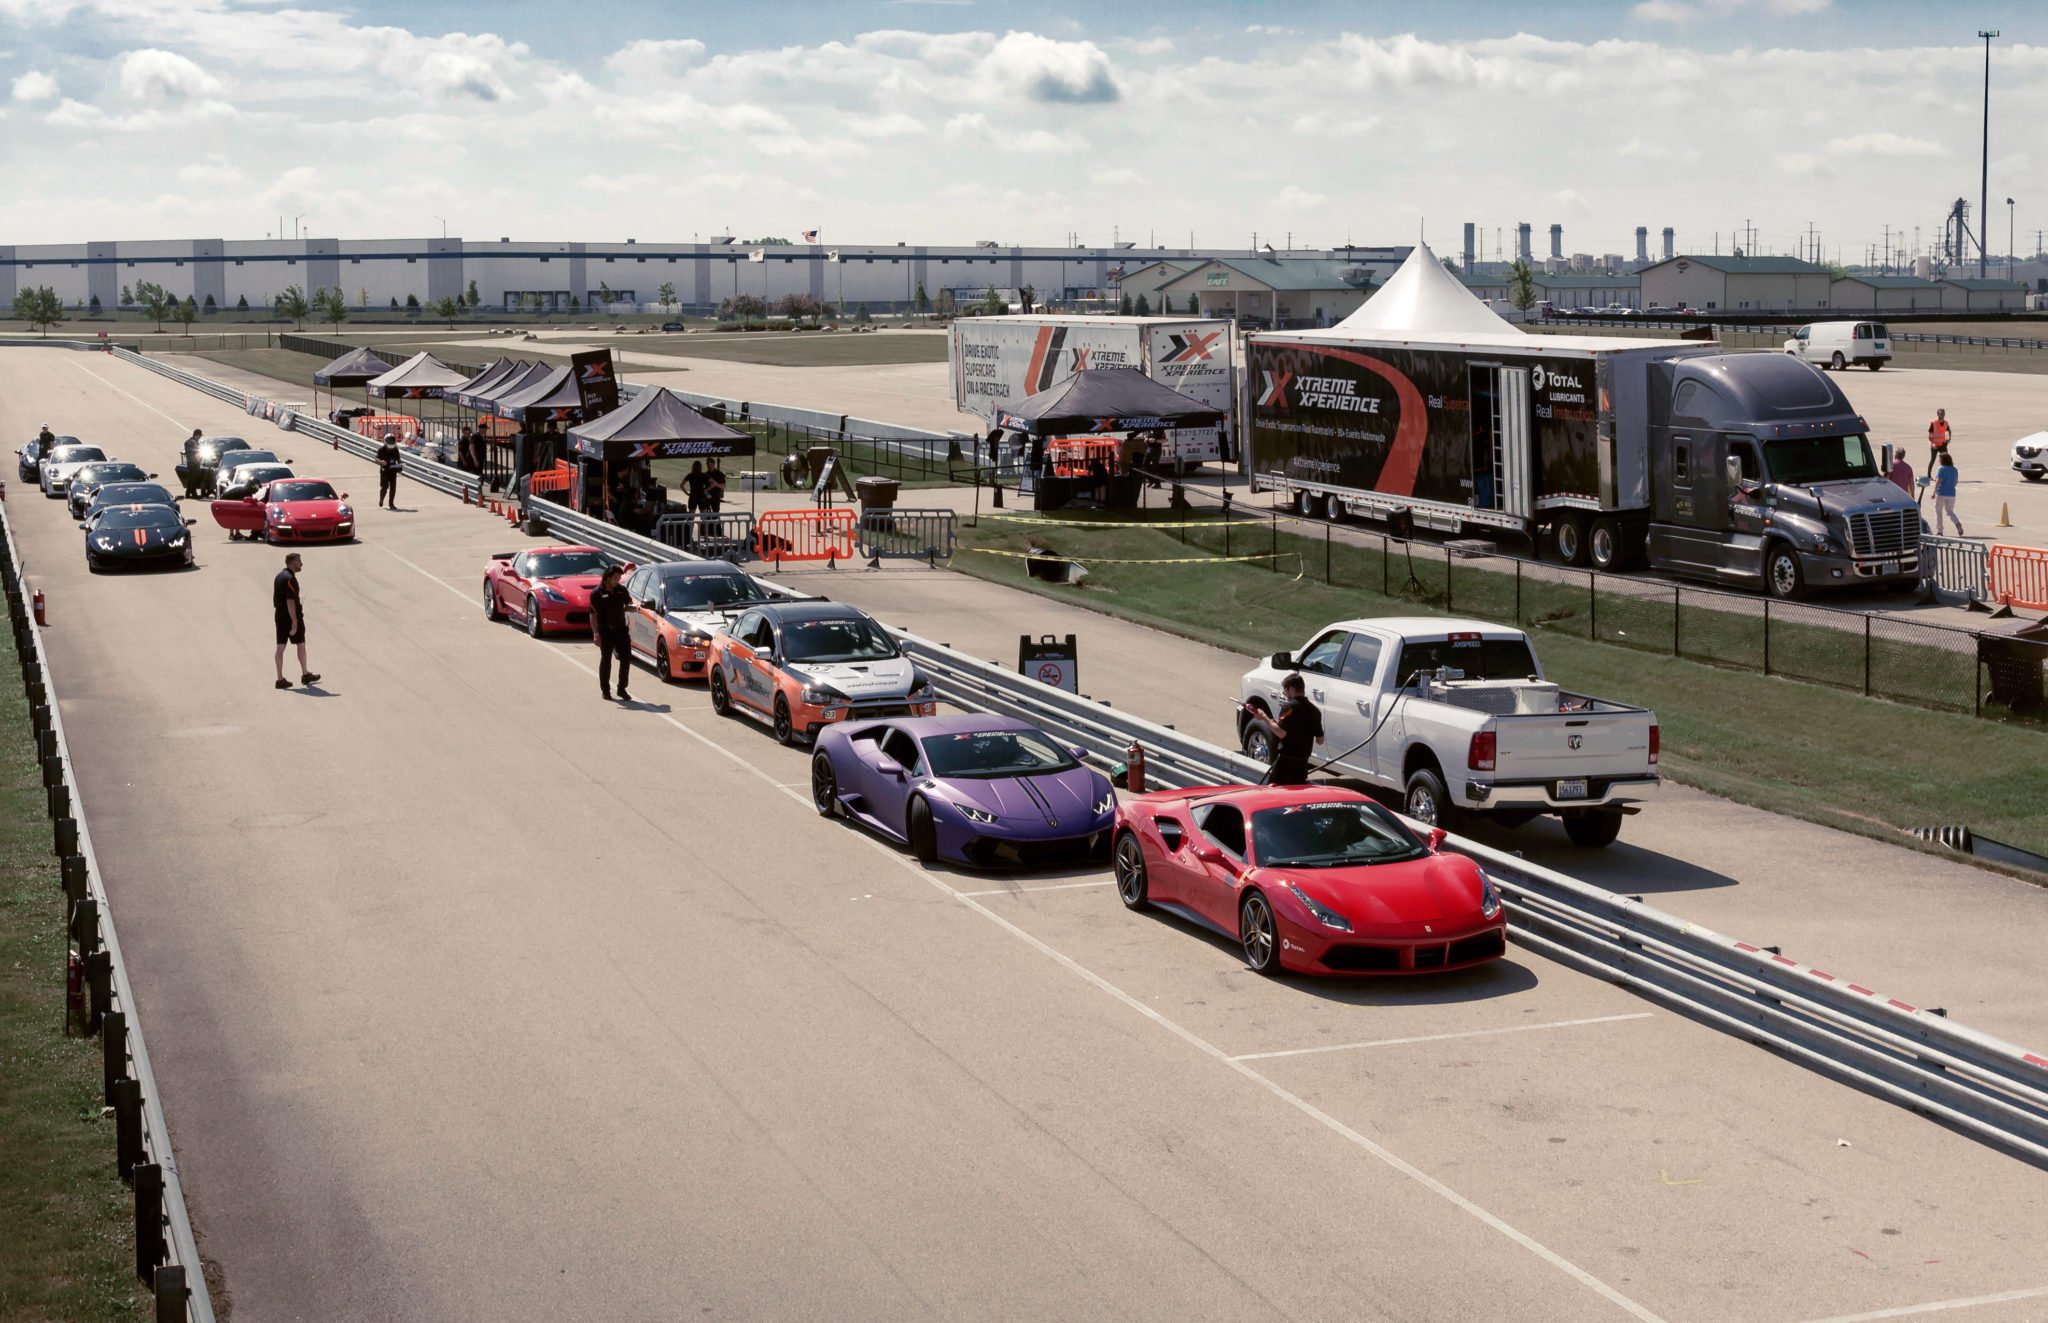 xtreme xperience fleet in pits of autobahn country club event